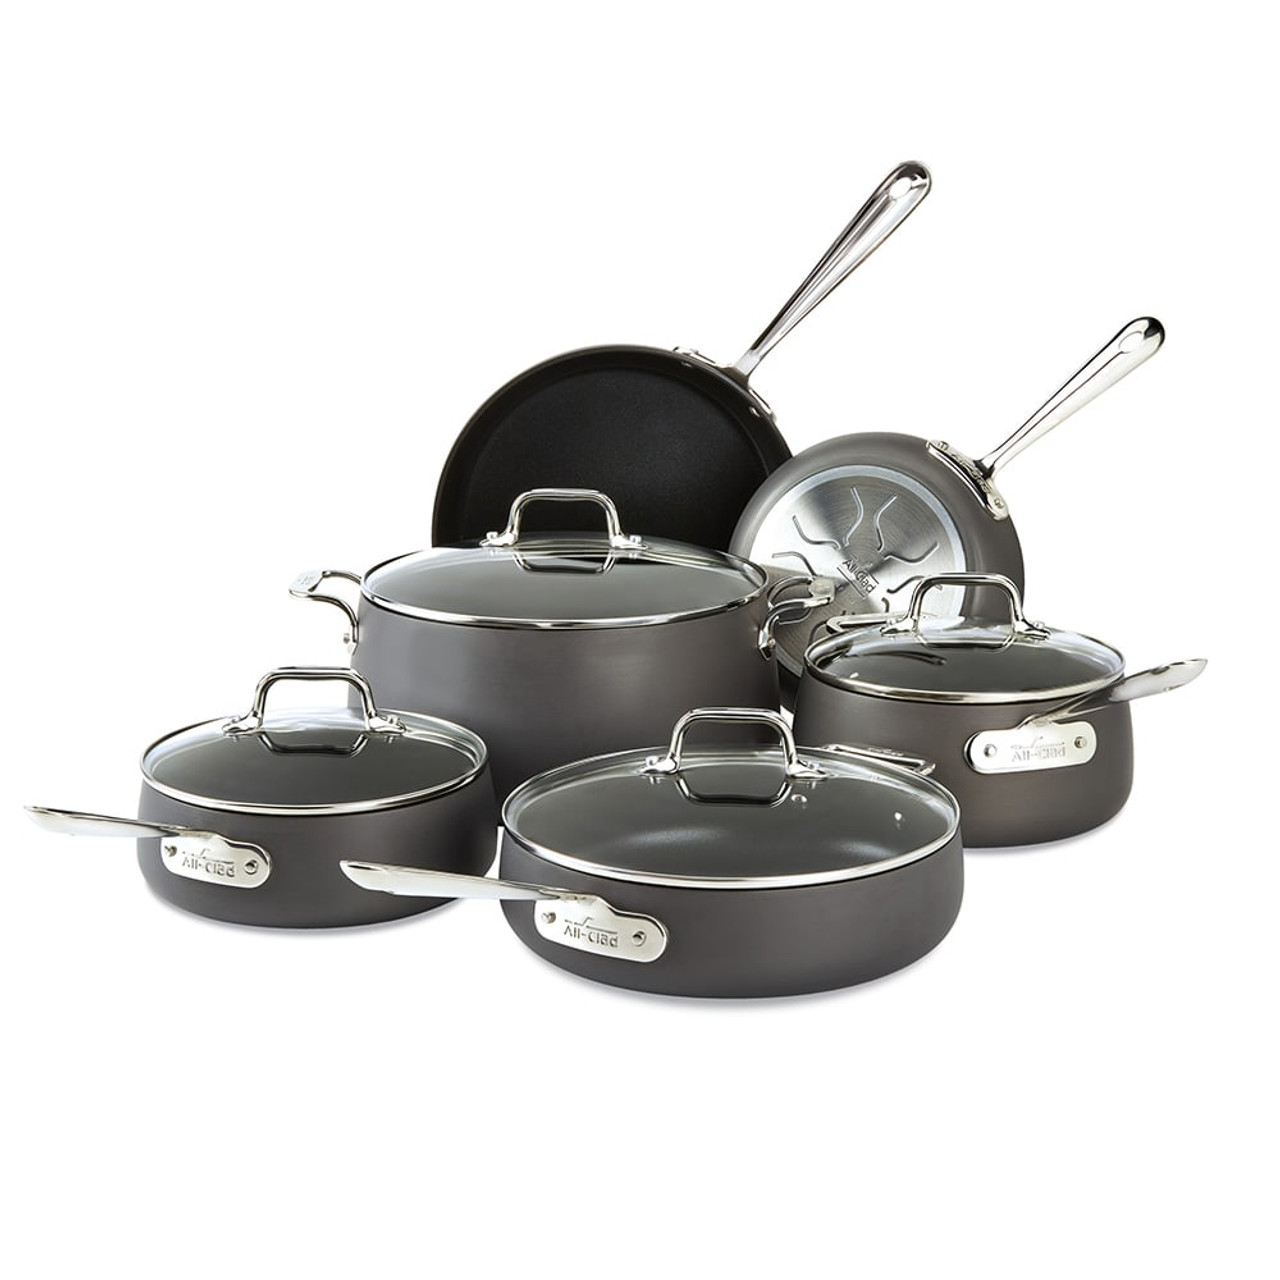 https://cdn11.bigcommerce.com/s-hccytny0od/images/stencil/1280x1280/products/518/8399/all-clad-ha1-10-piece-cookware-set__32826.1595949308.jpg?c=2?imbypass=on